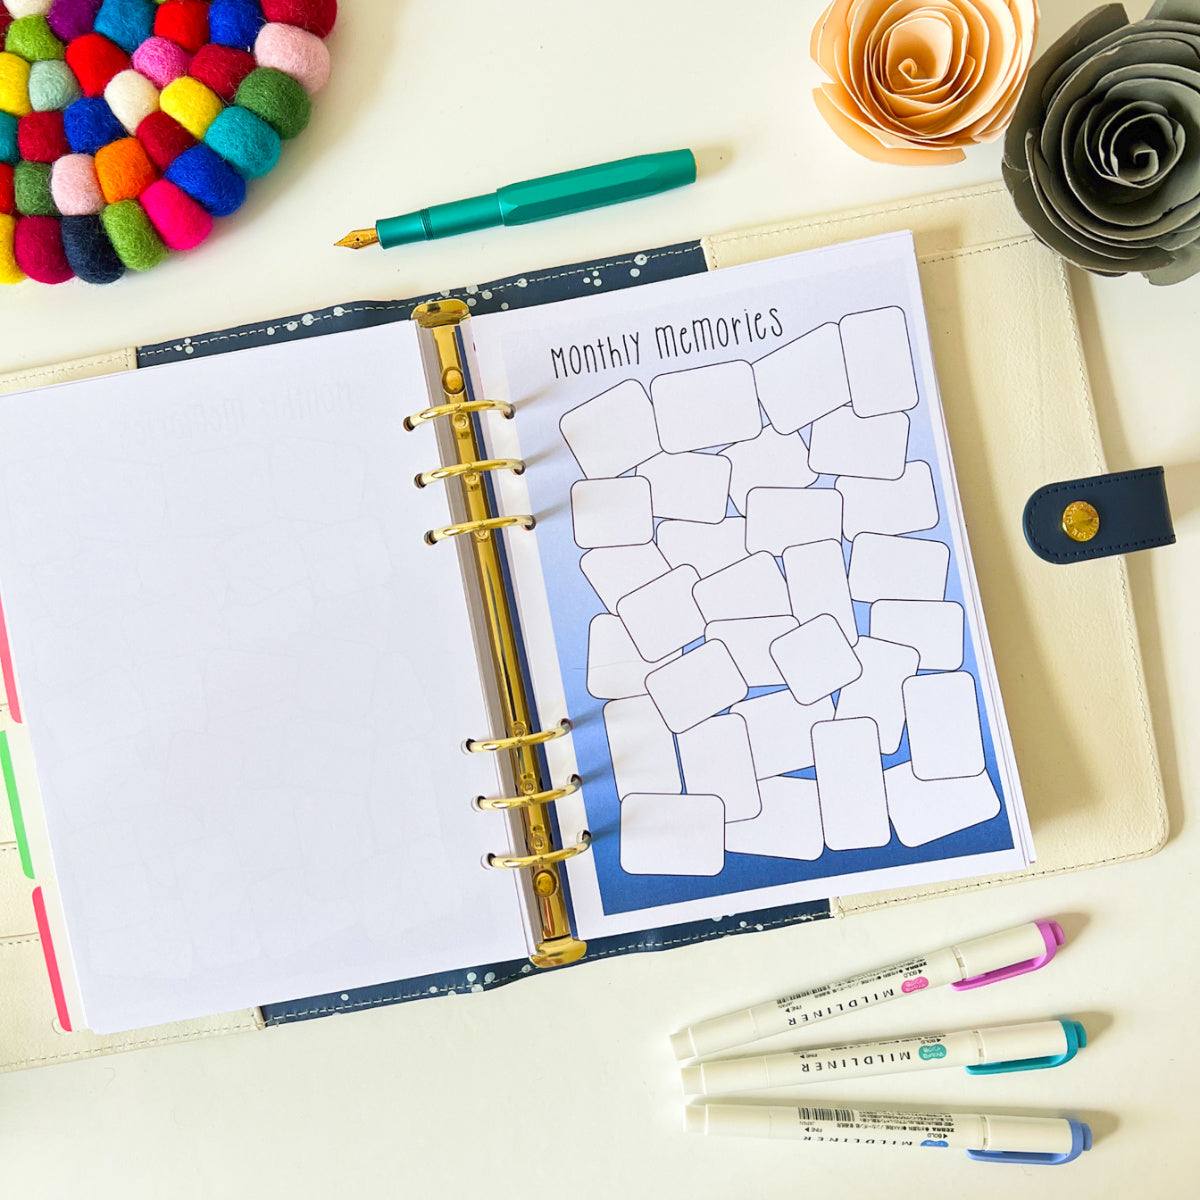 A planner lies open on a table, displaying a "Memory Log" page perfect for capturing positive moments. Surrounding the planner are colorful markers, a teal pen, a wool coaster, and two decorative paper flowers, inviting you to log everyday life's highlights.